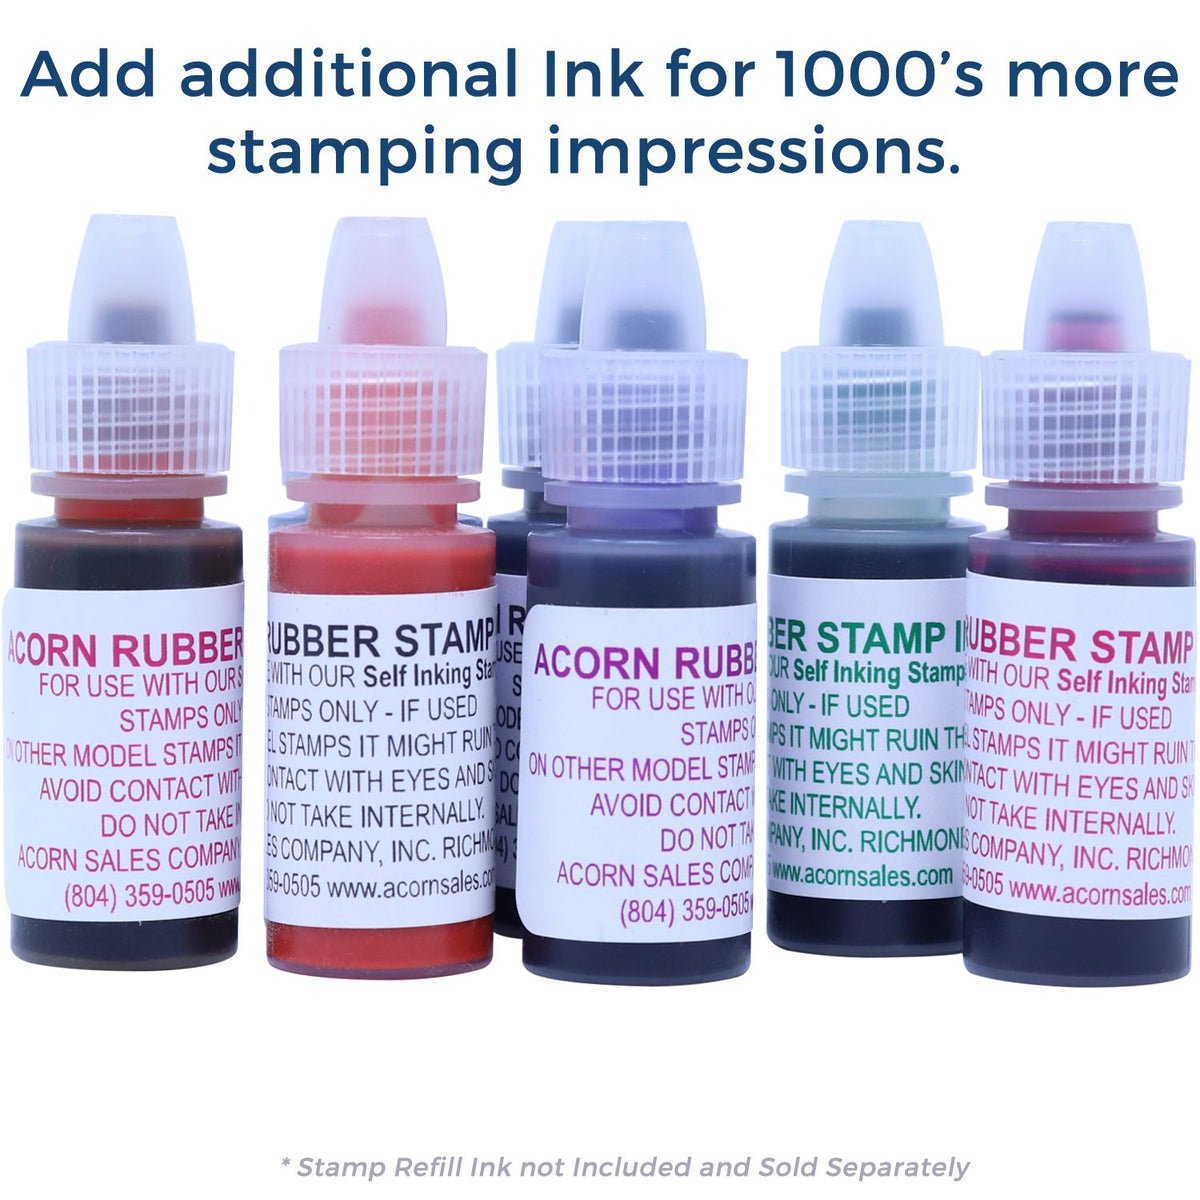 Refill Ink for Self-Inking Round Surprised Smiley Stamp Available